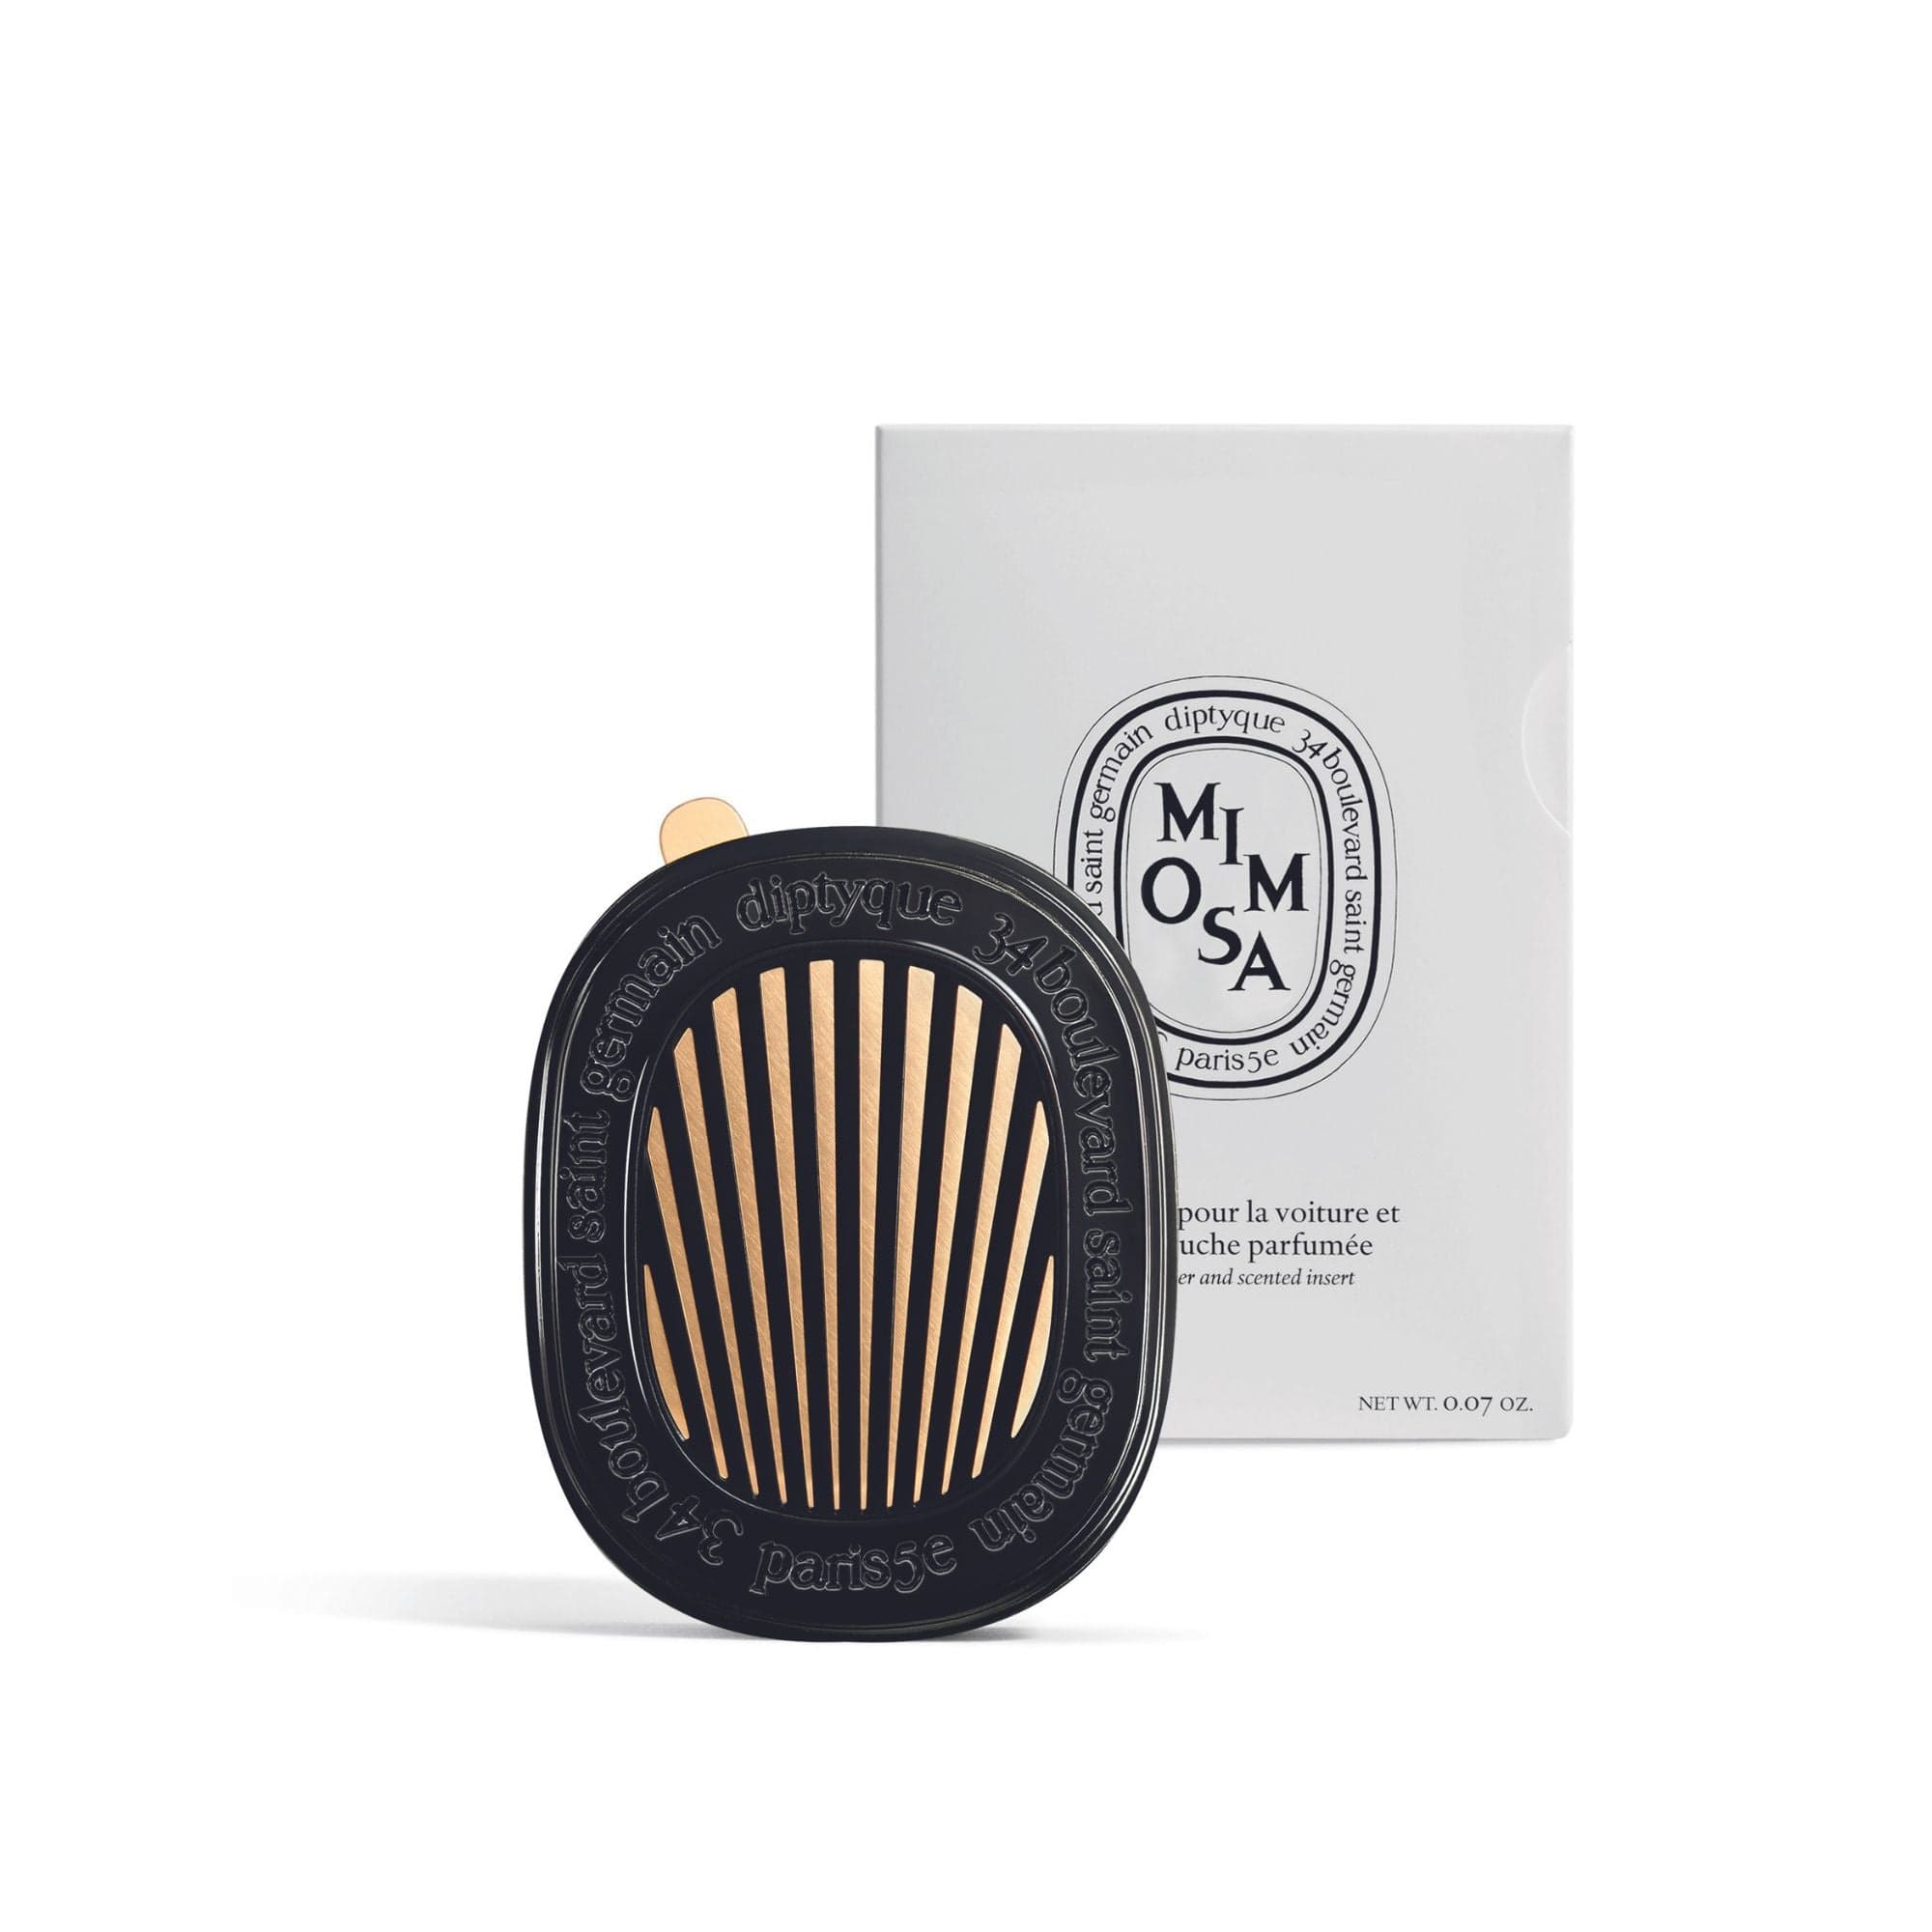 Diptyque car scent diffuser and 1 refill Car Diffuser by Mimosa